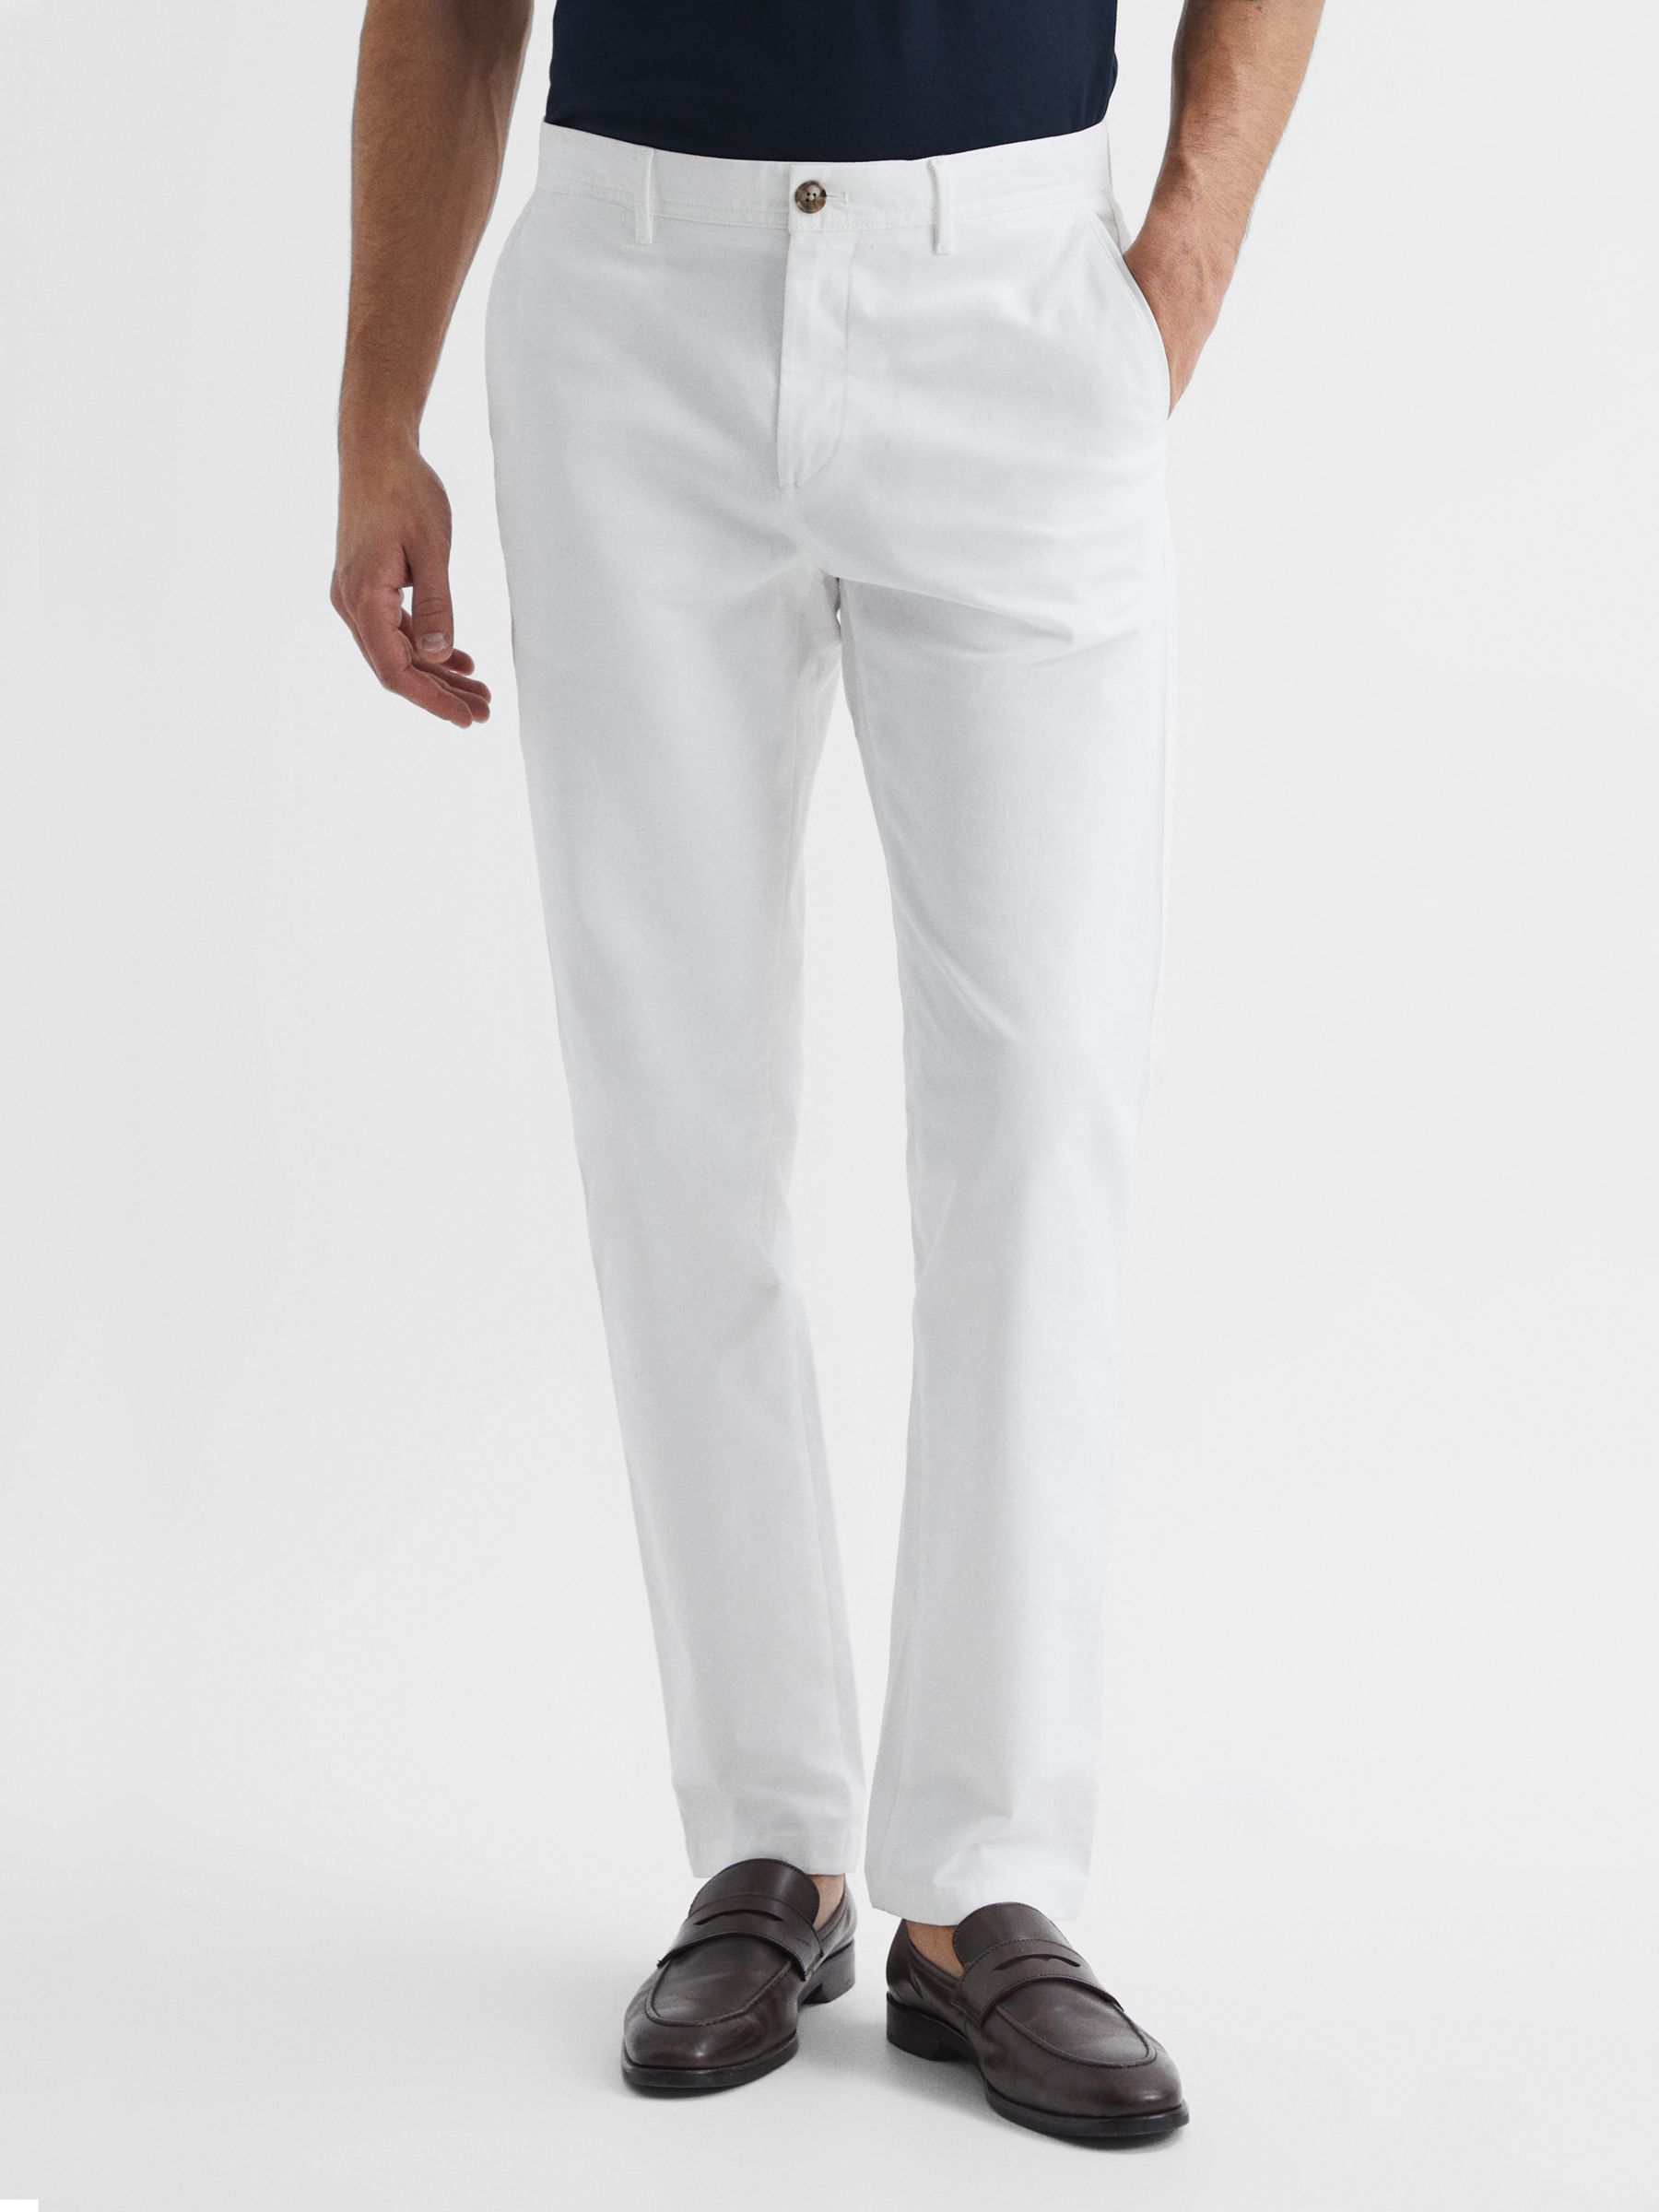 Reiss Pitch Slim Fit Stretch Cotton Chino Trousers, White at John Lewis ...